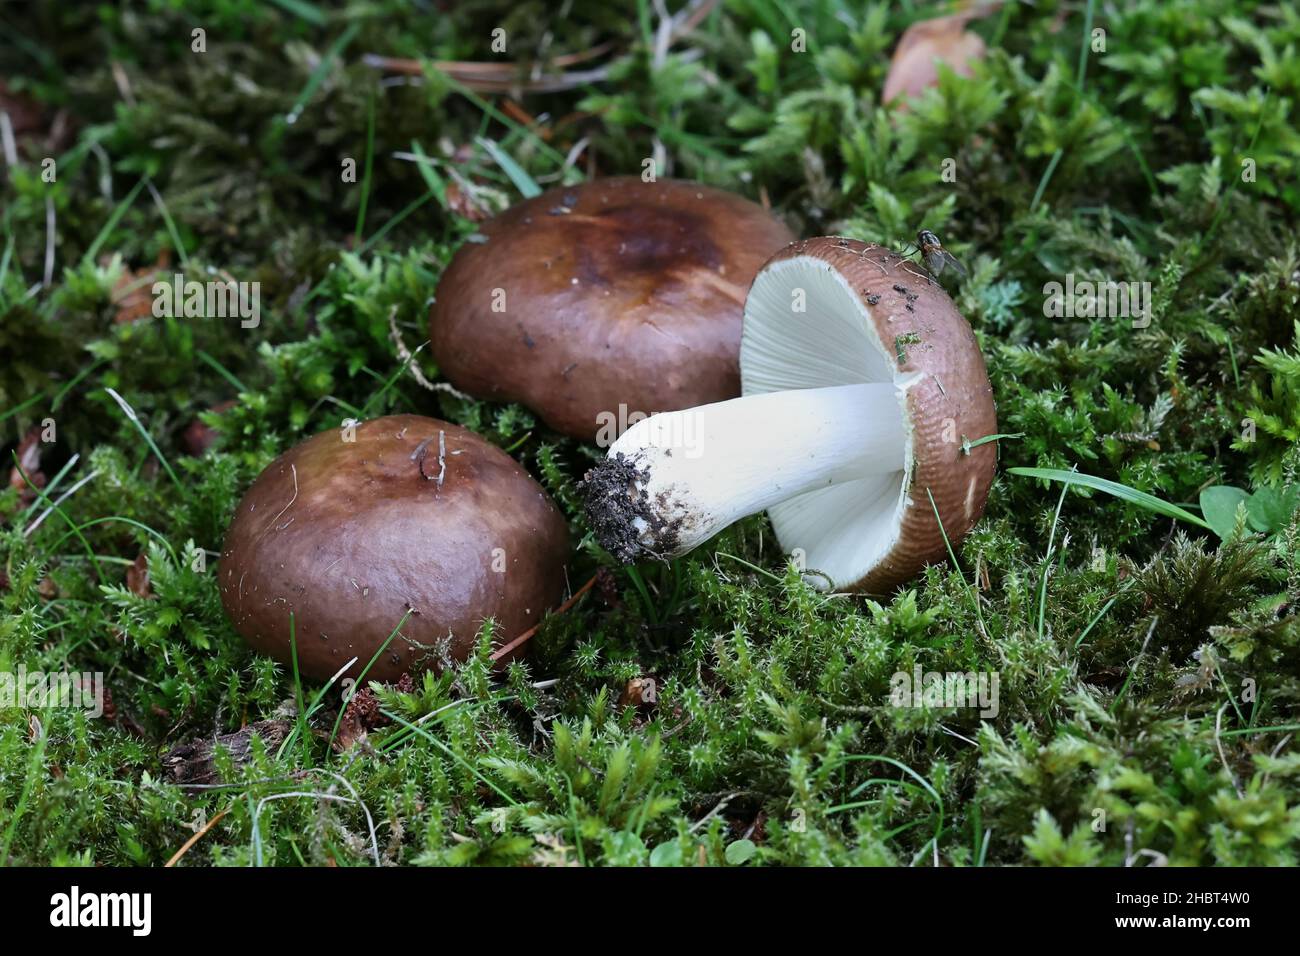 Russula integra, commonly known as the nutty brittlegill or entire russula, wild edible mushroom from Finland Stock Photo